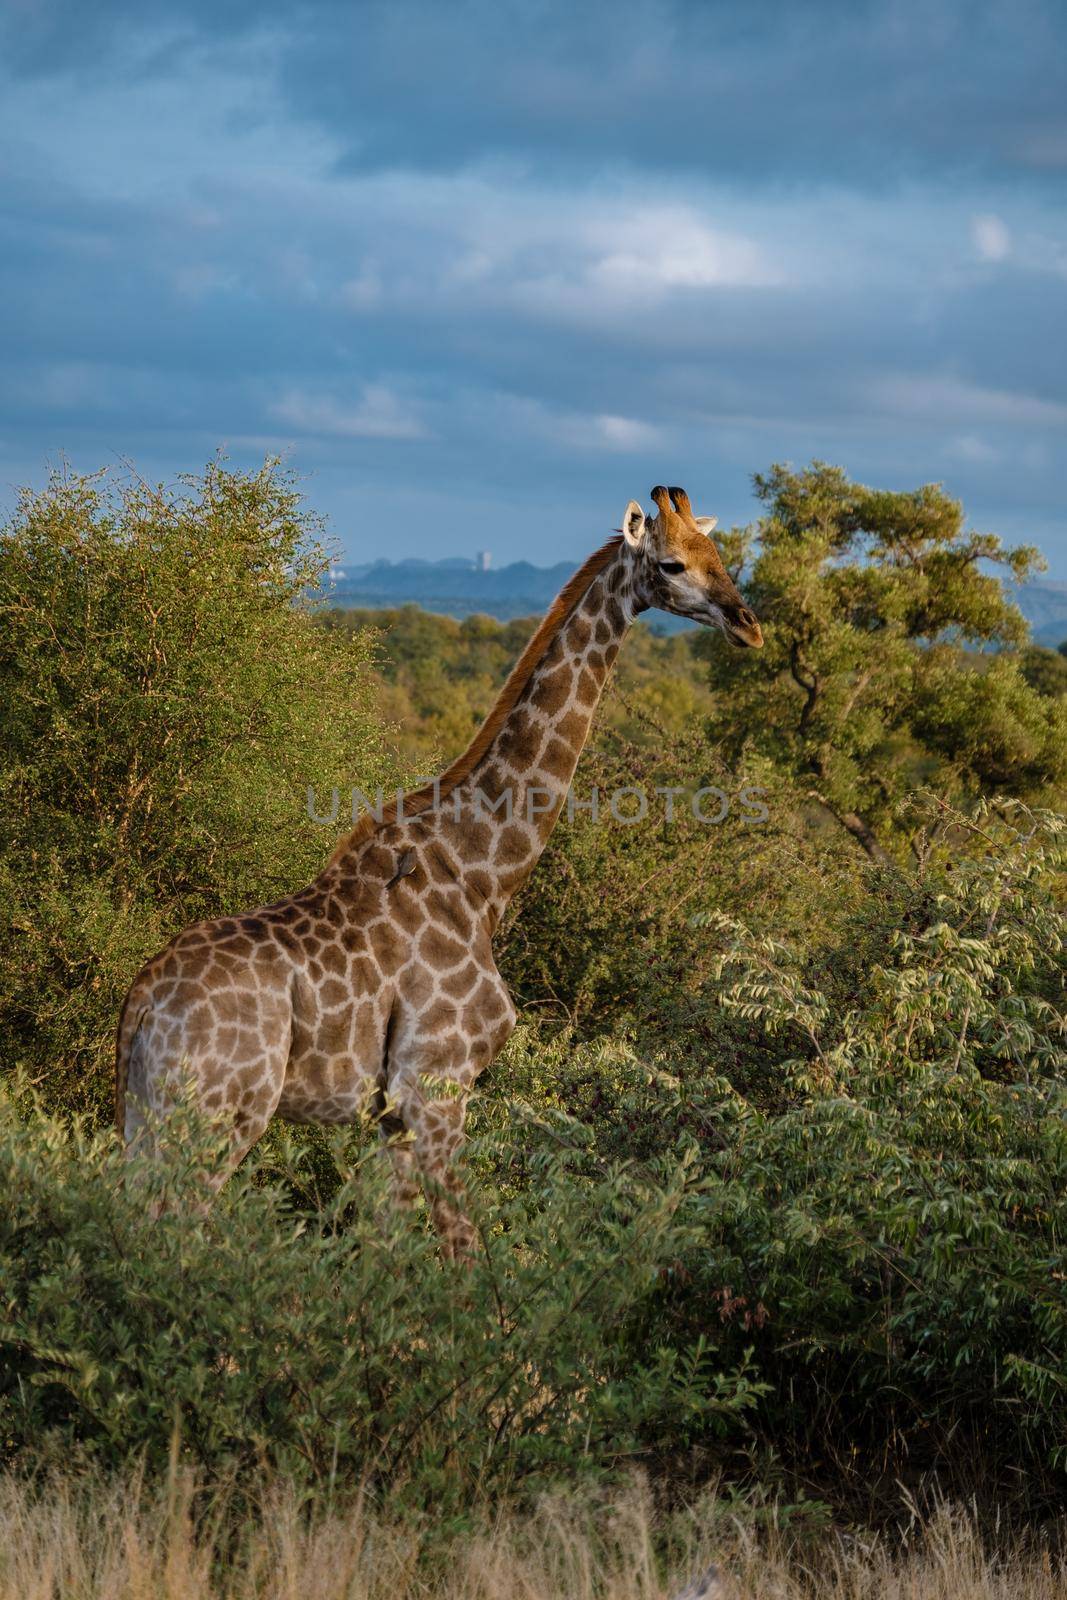 Giraffe at a Savannah landscape during sunset in South Africa at The Klaserie Private Nature Reserve inside the Kruger national park South Africa. Giraffe by a tree in the bush